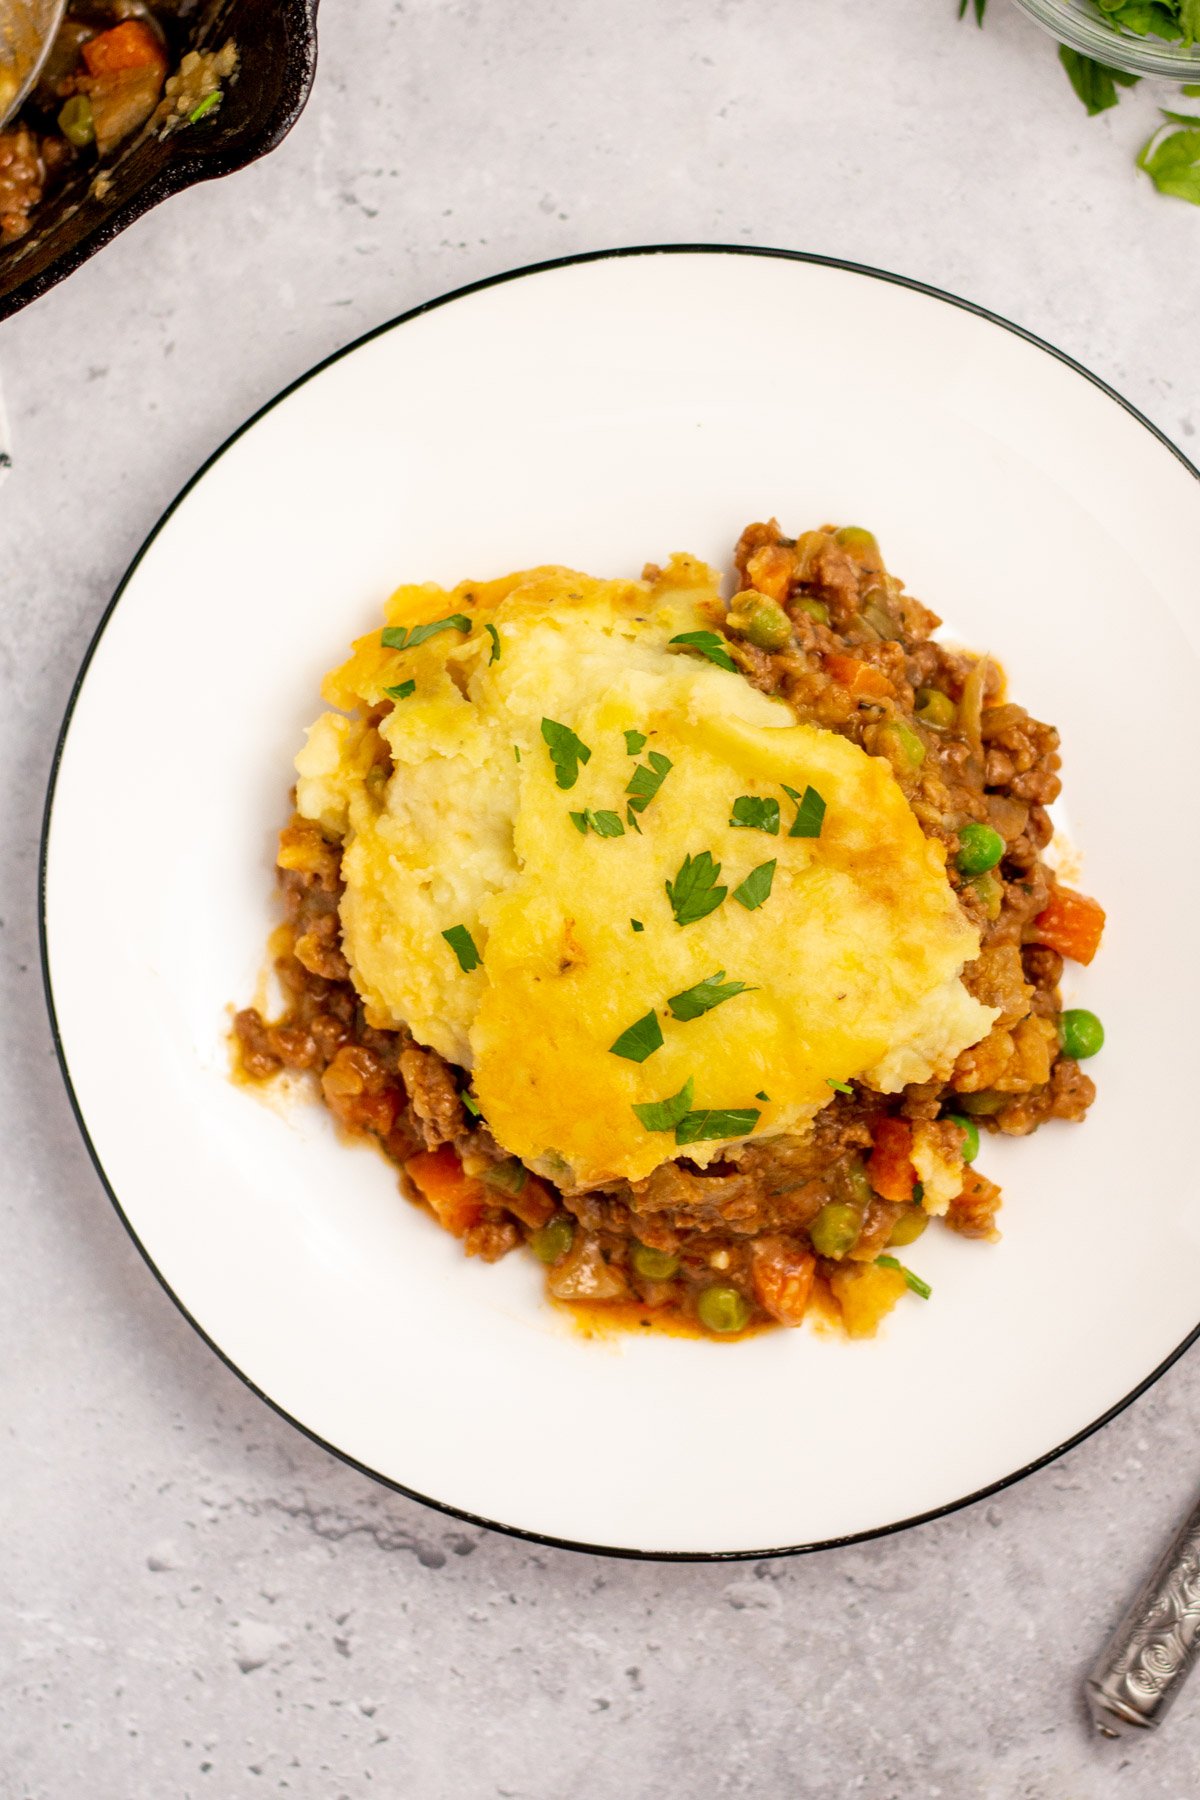 This Whole30 Shepherd's Pie recipe is baked in an oven proof skillet which makes the cooking process simple and easy. It's also a budget-friendly ground beef recipe that's paleo, gluten-free, dairy-free and can be made low carb. With vegetables like carrots, onions, celery and peas mixed in with a flavorful gravy, the filling is a perfect companion for the creamy mashed potatoes. It's a hearty, cozy recipe that's family friendly and also great for meal prep! #groundbeefrecipes #whole30beef #whole30recipes #paleogroundbeef